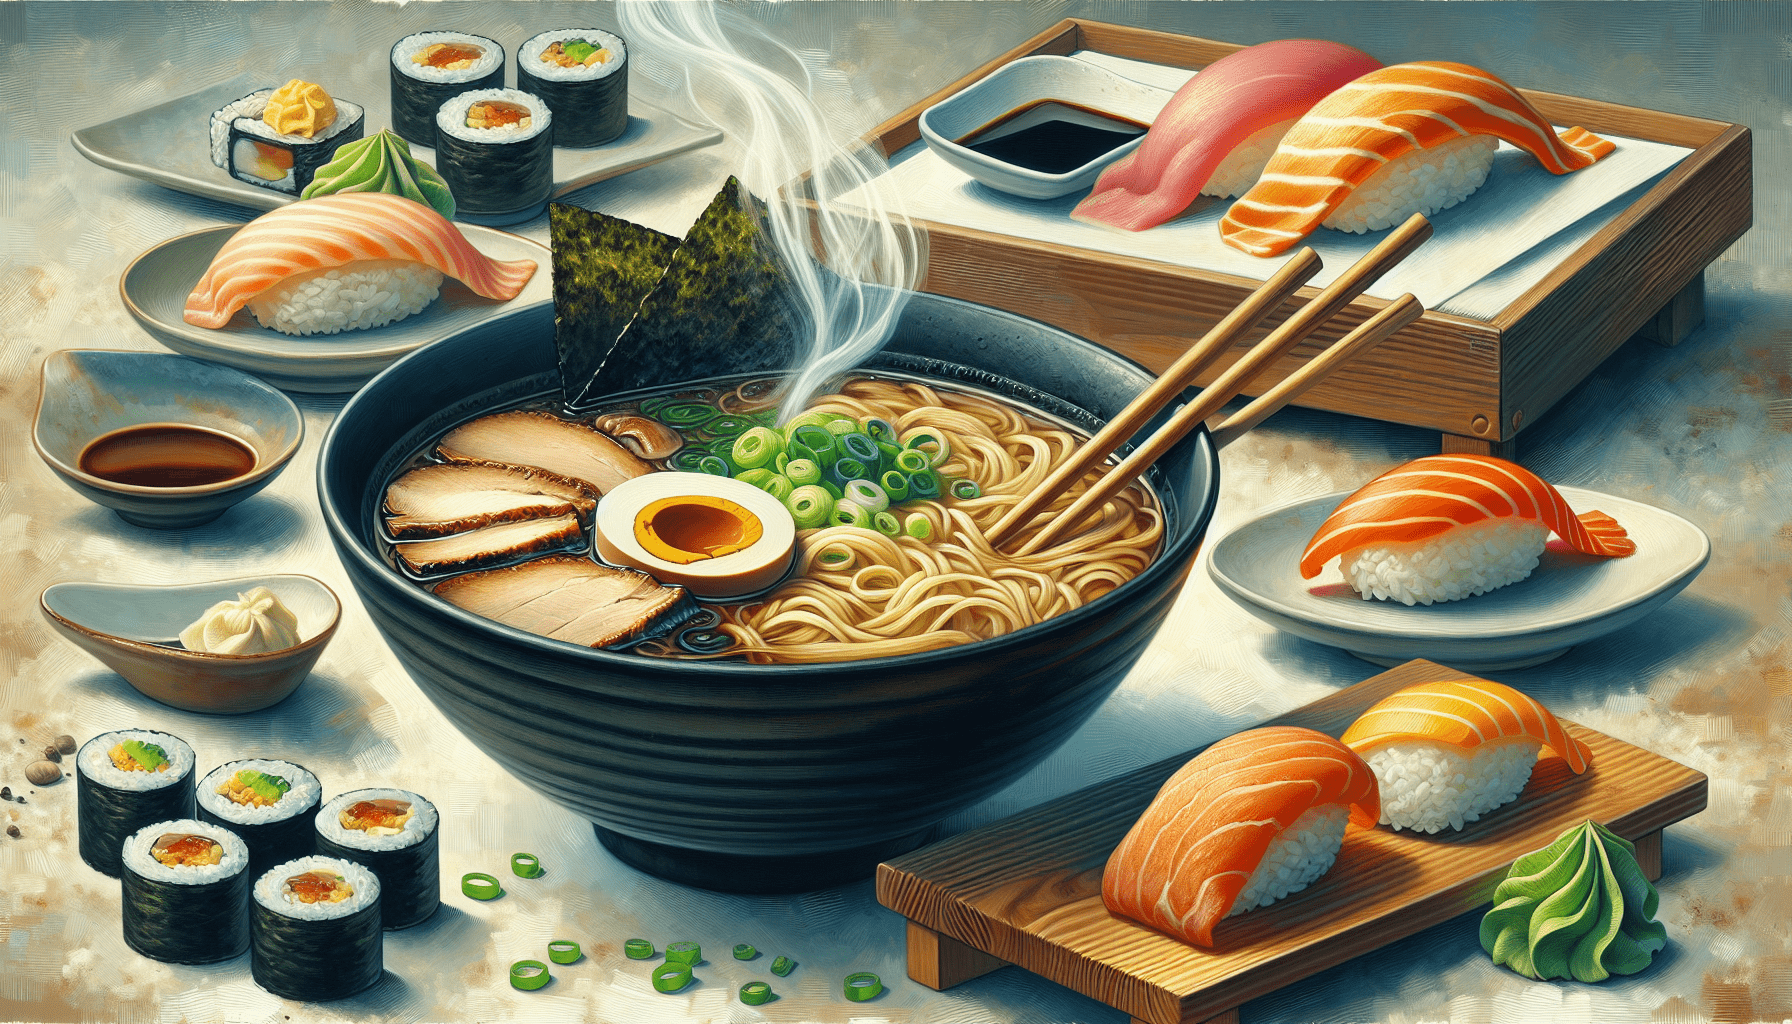 Whats Your Favorite Japanese Recipe Thats Perfect For A Quick Lunch?